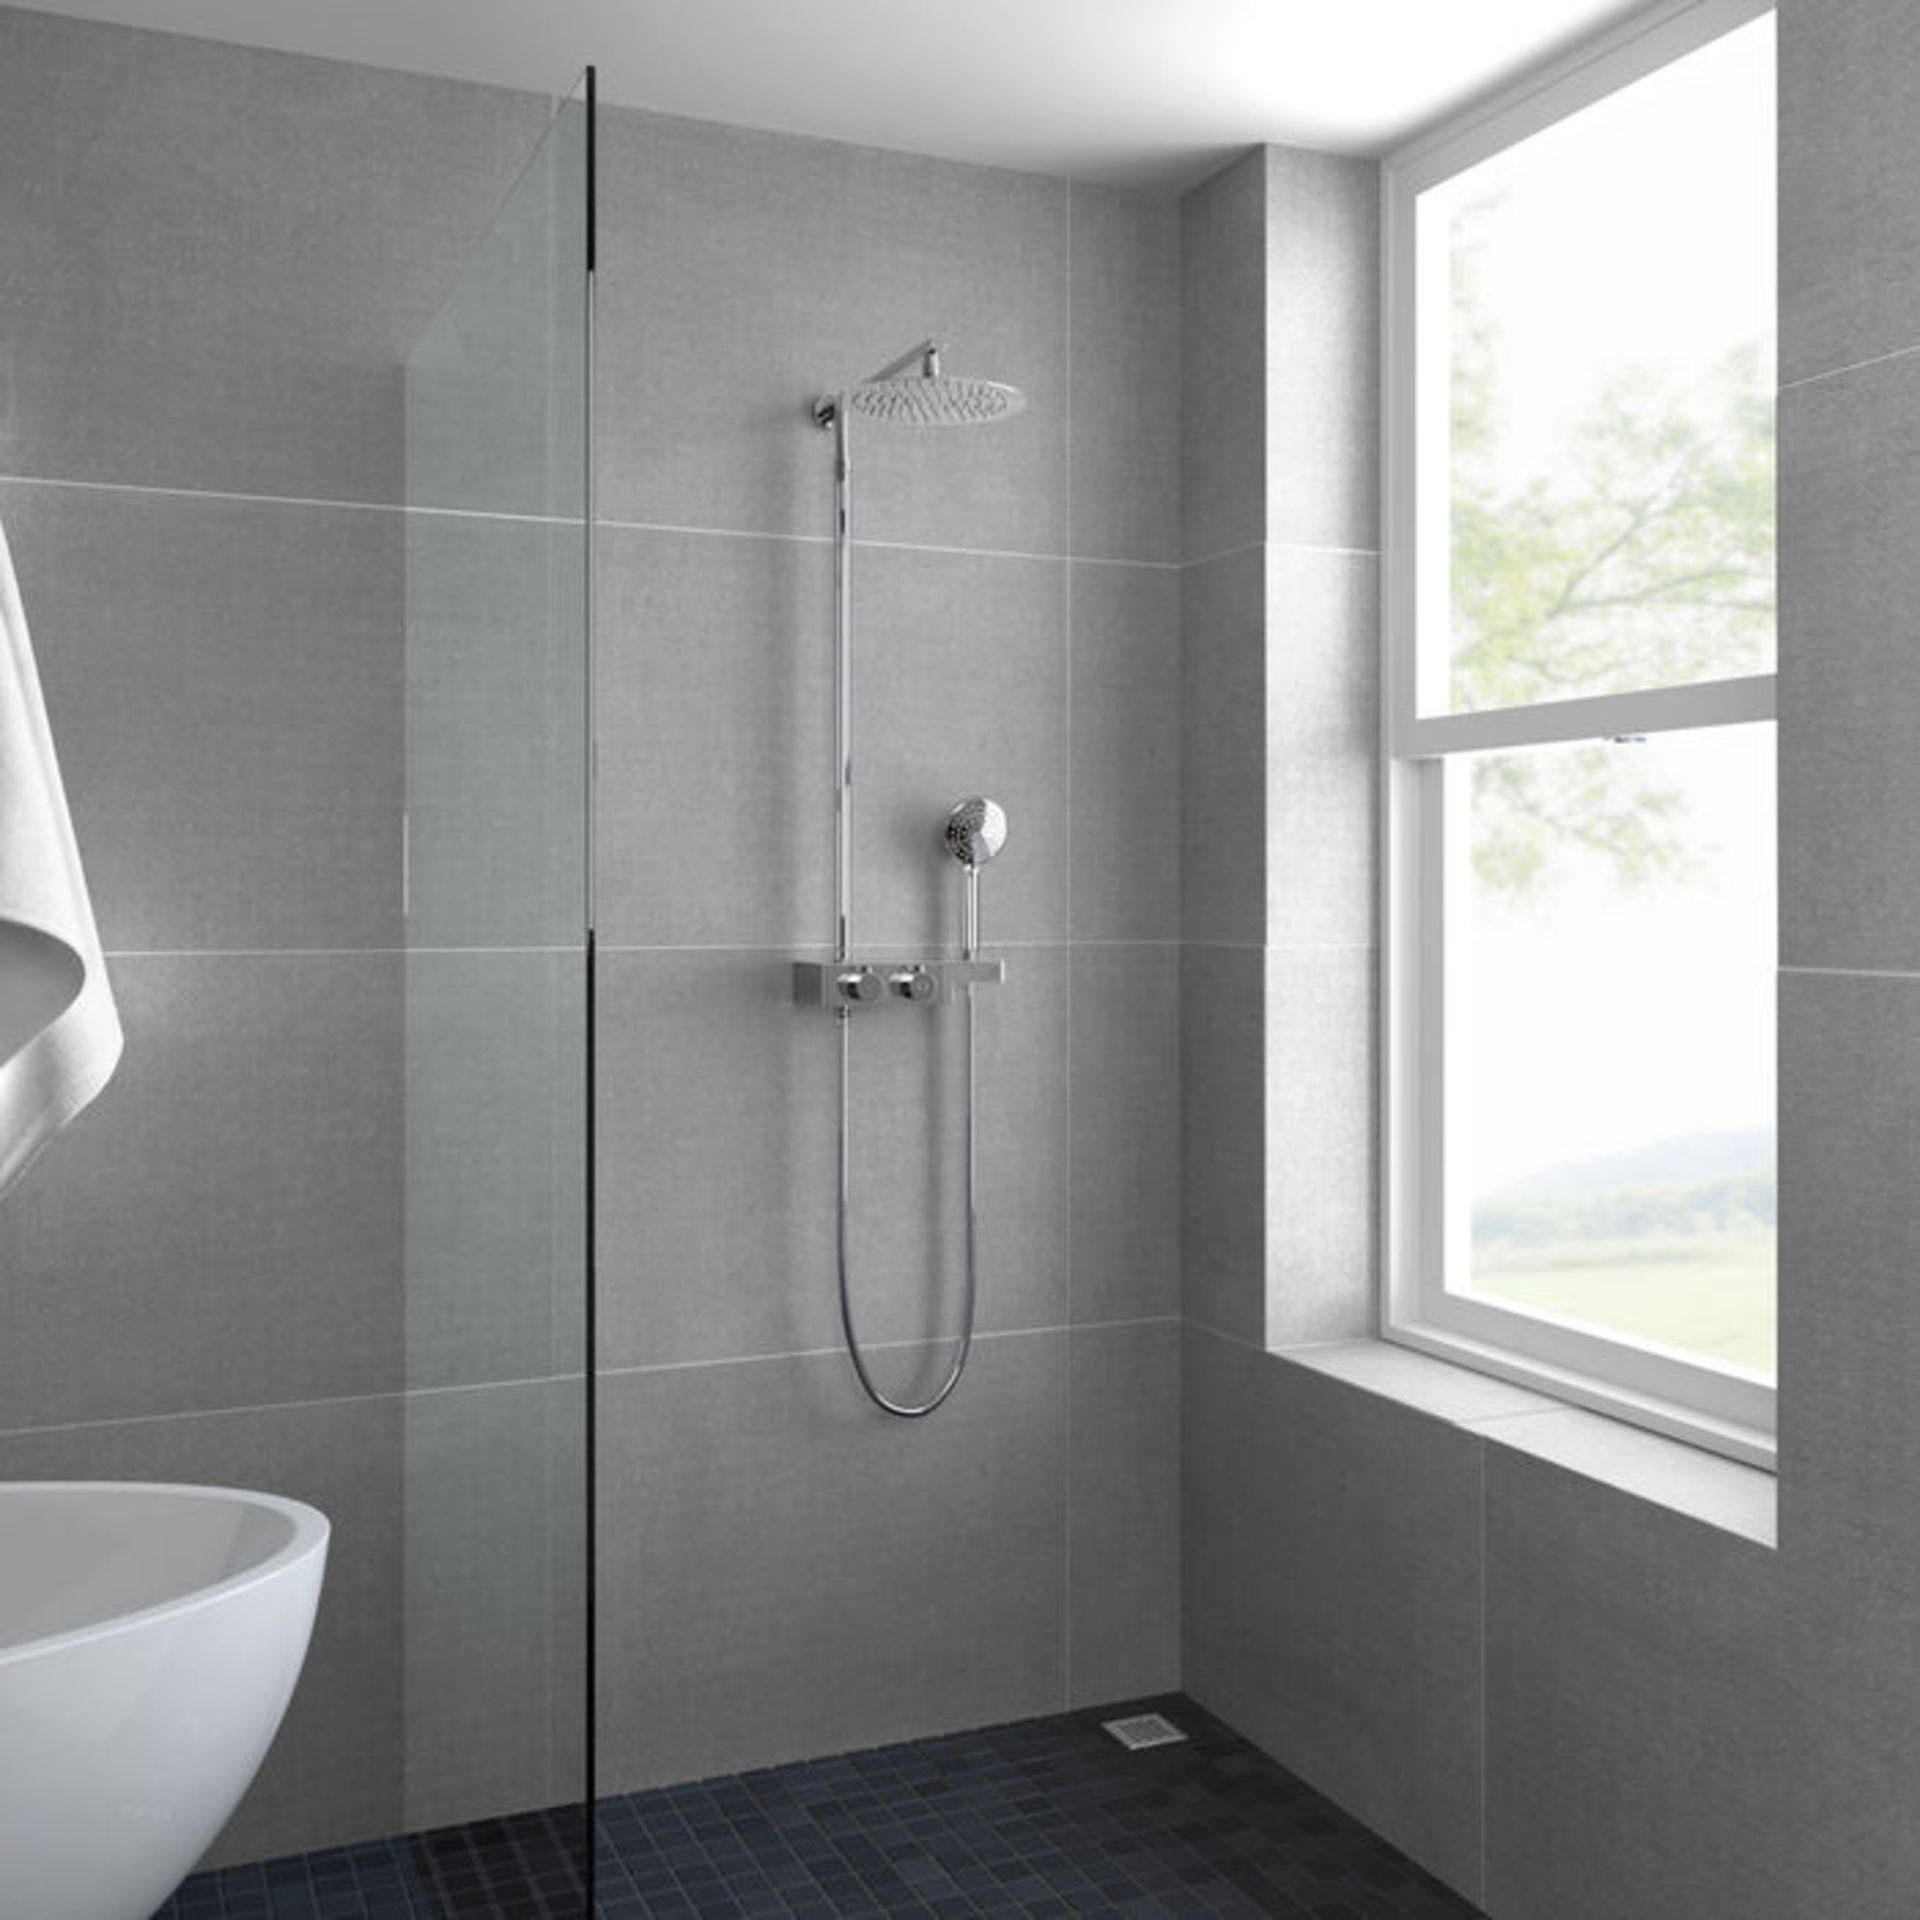 (PA37) Round Exposed Thermostatic Mixer Shower Kit & Large Head. Cool to touch shower for additional - Image 4 of 4